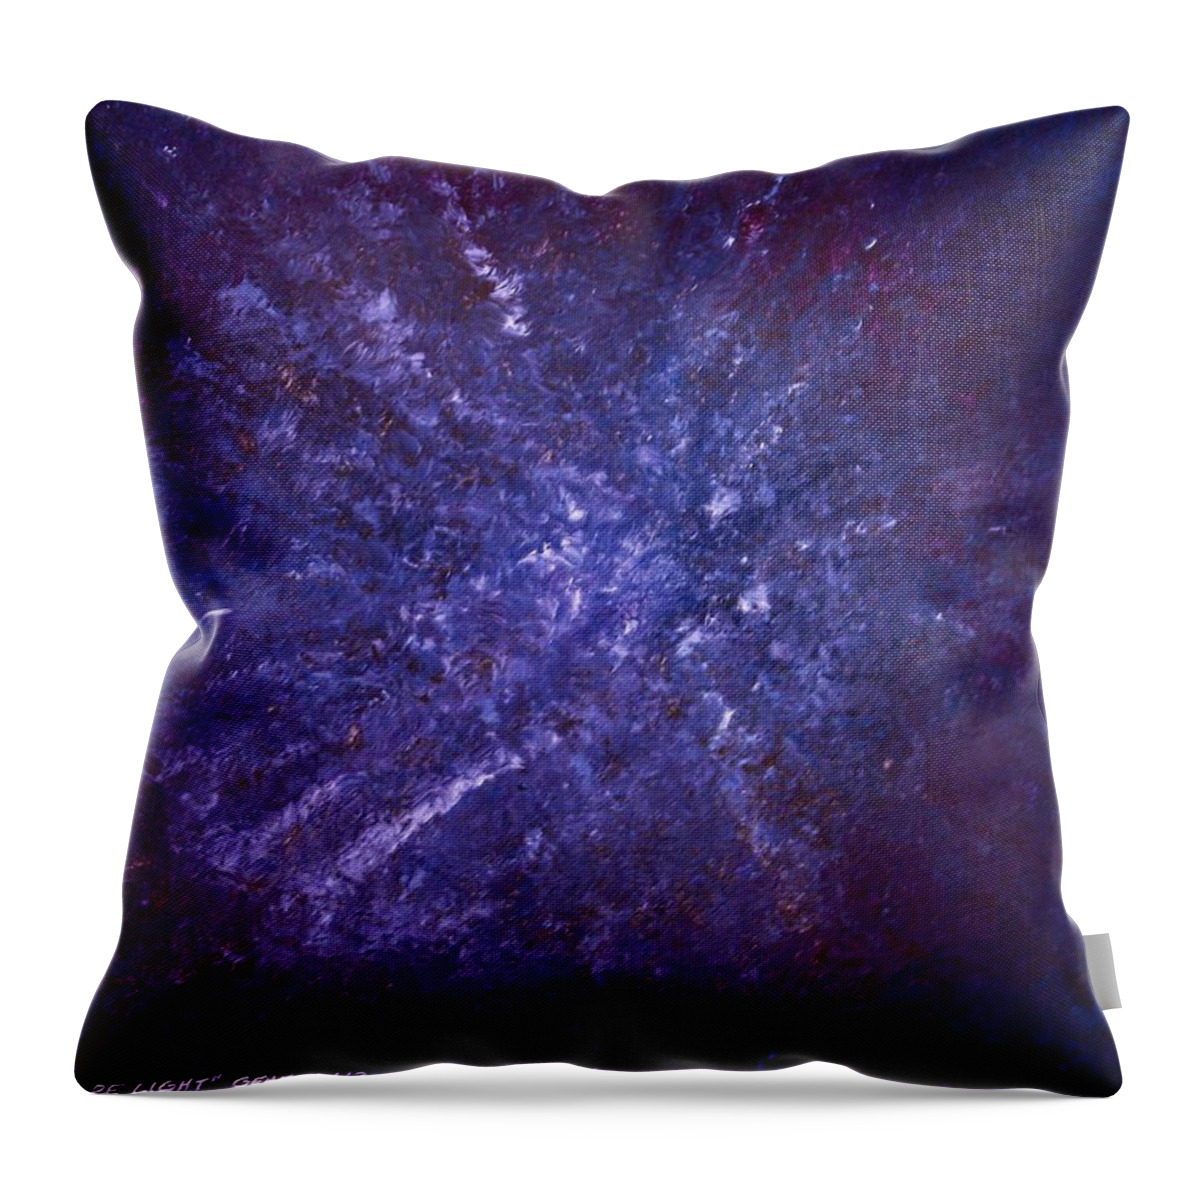 Let There Be Light Throw Pillow featuring the mixed media Let There Be Light by Christine Nichols